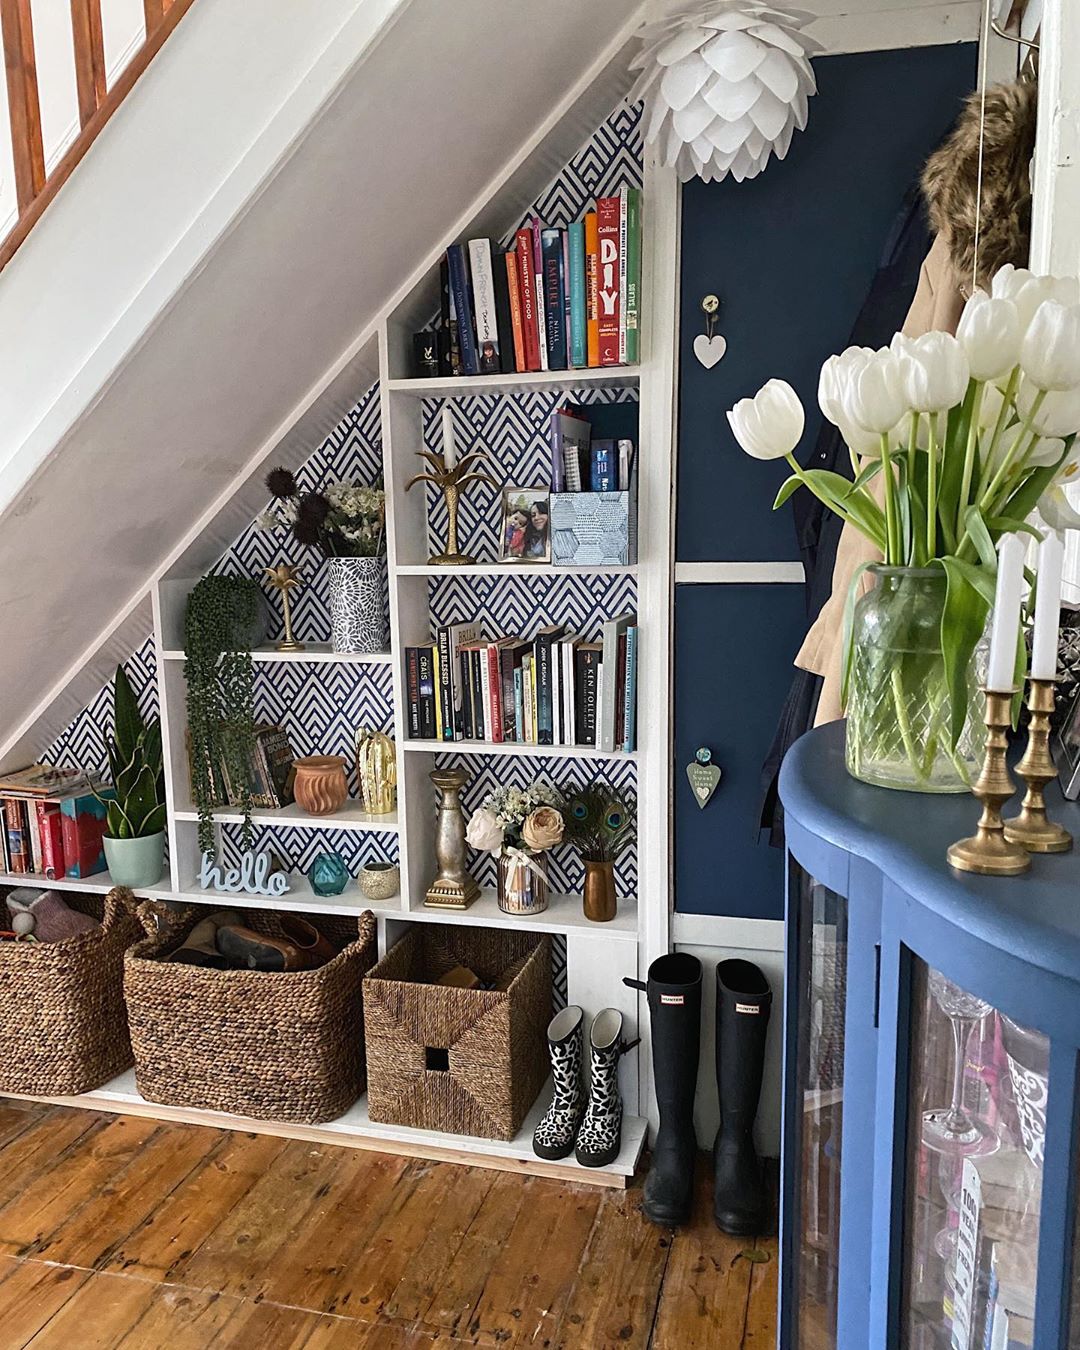 under stair storage space with shelves and woven baskets photo by Instagram user @melaniejadedesign